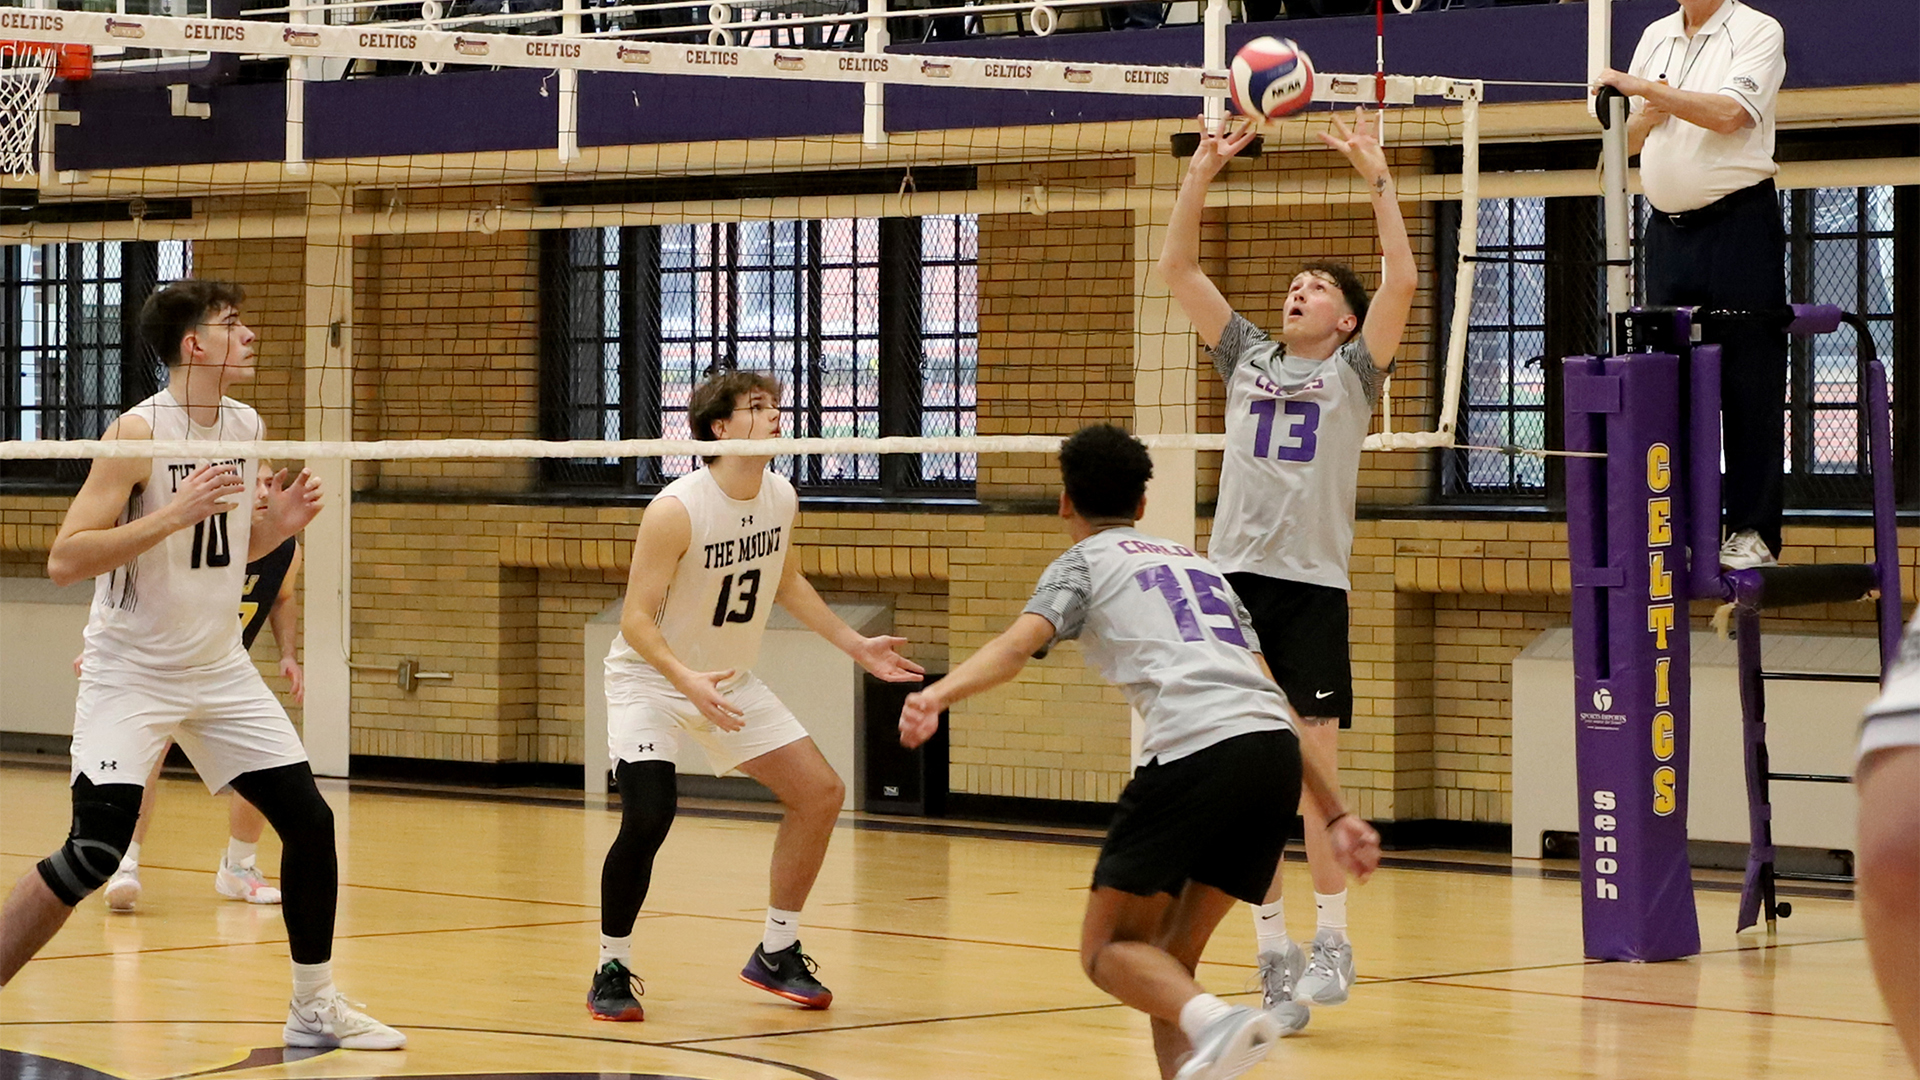 James Stone had six solo blocks and 26 assists. Photo by Robert Cifone.